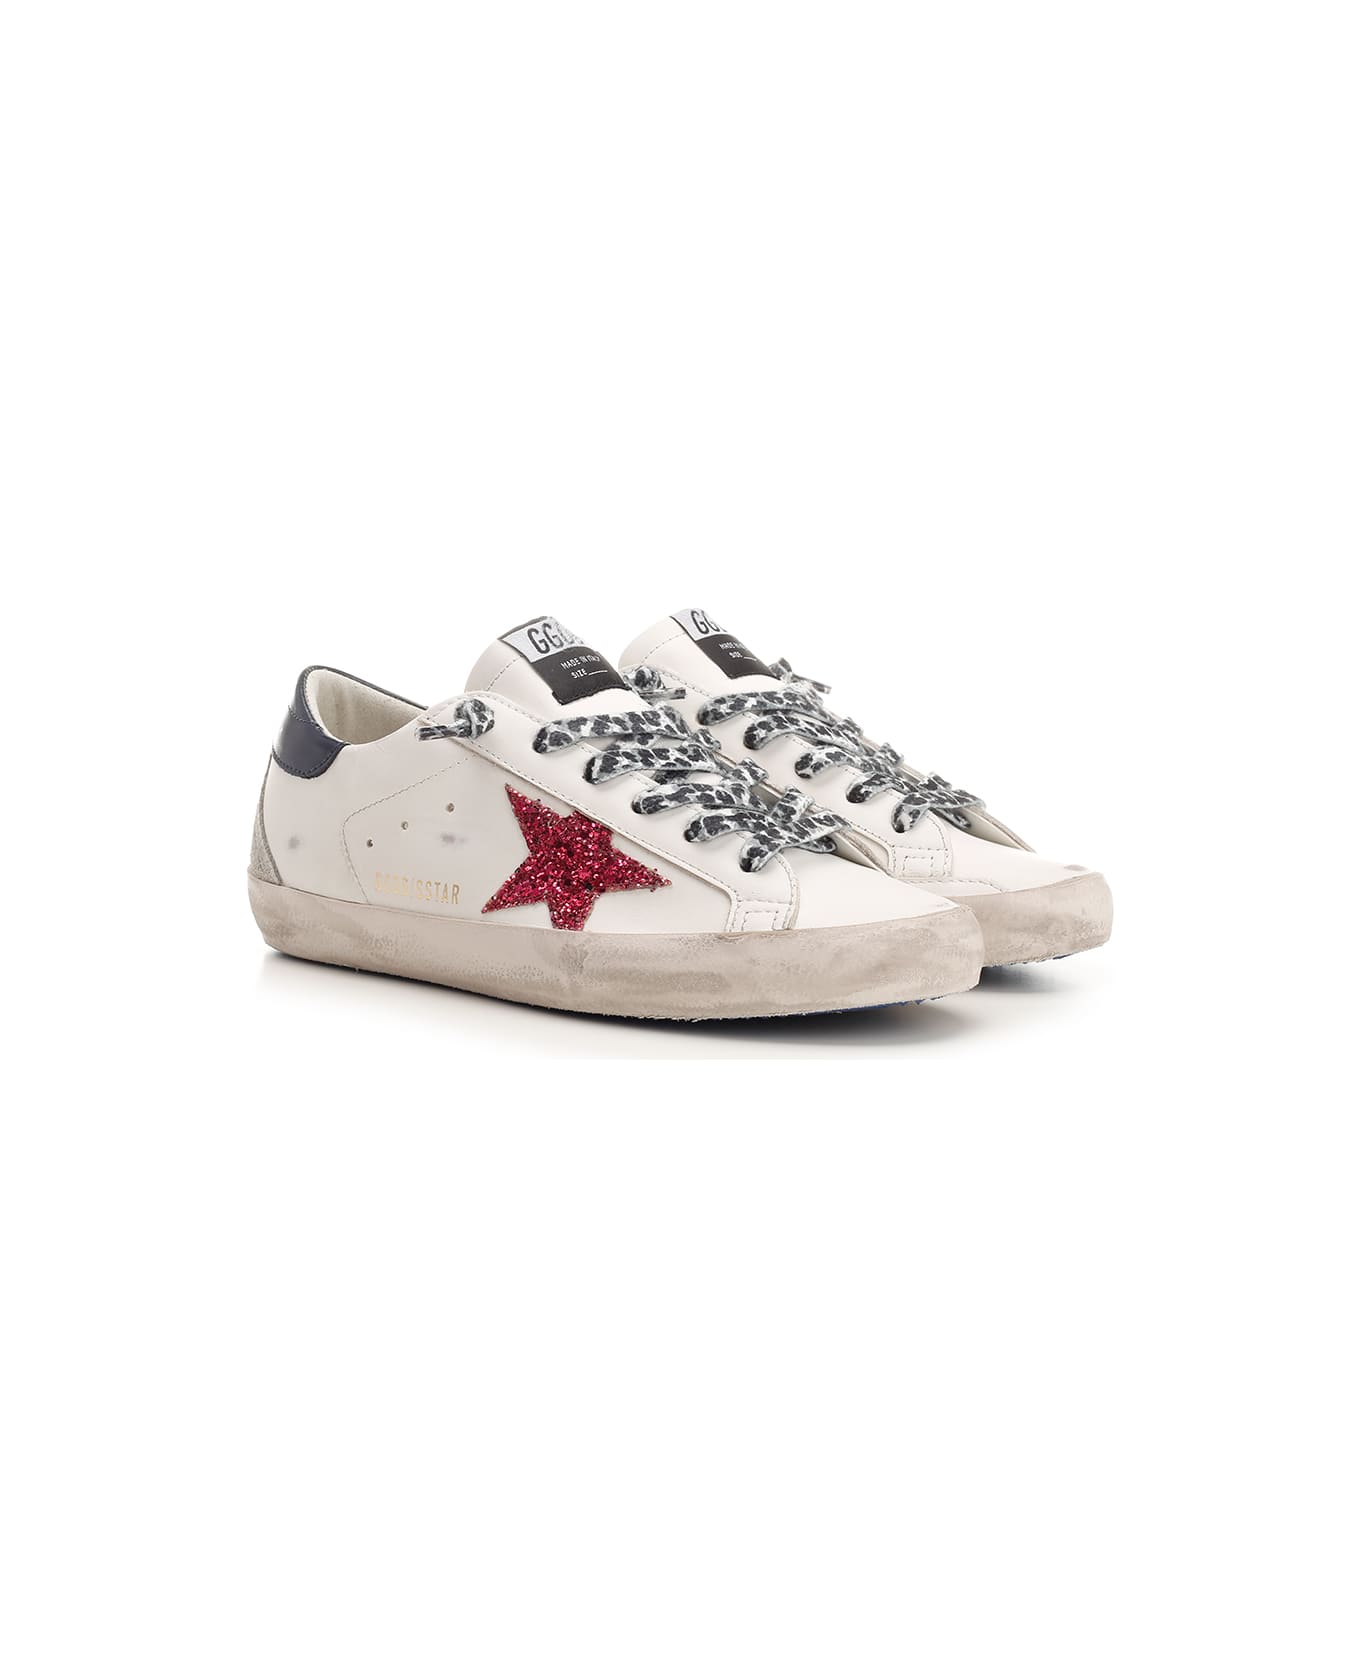 Golden Goose Superstar Classic Sneakers - White